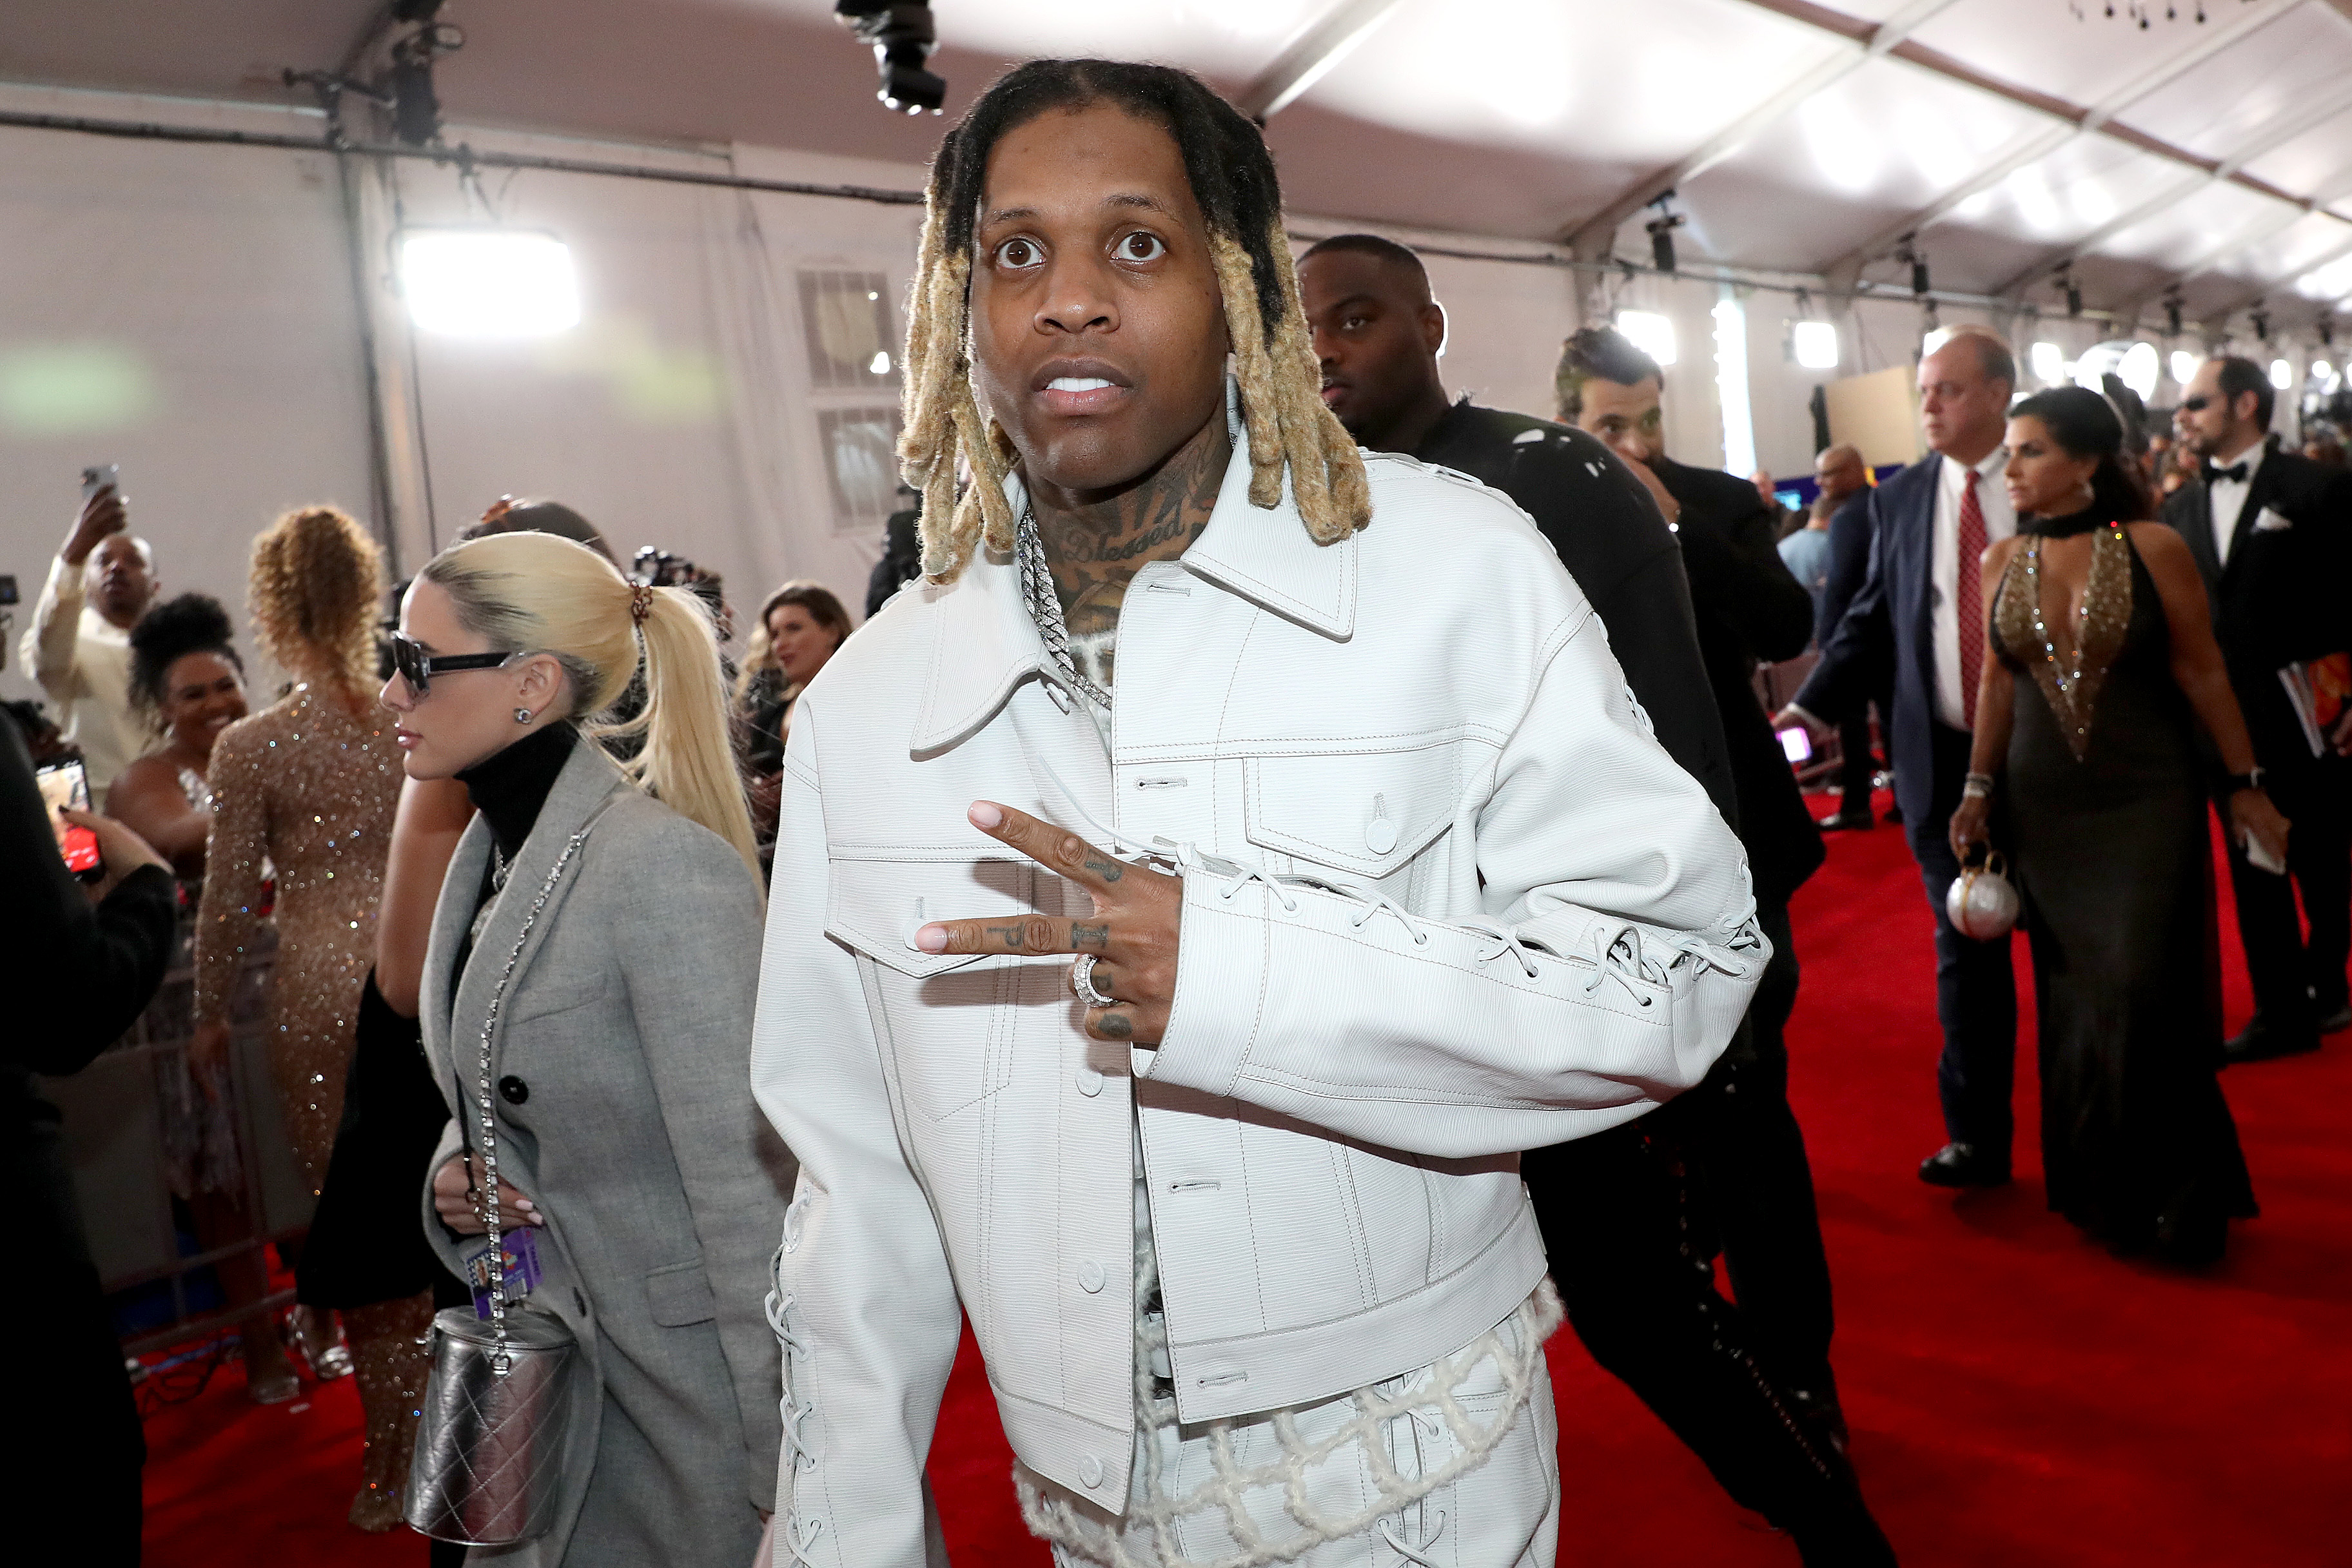 Lil Durk Seen Wearing Questionable Outfit.